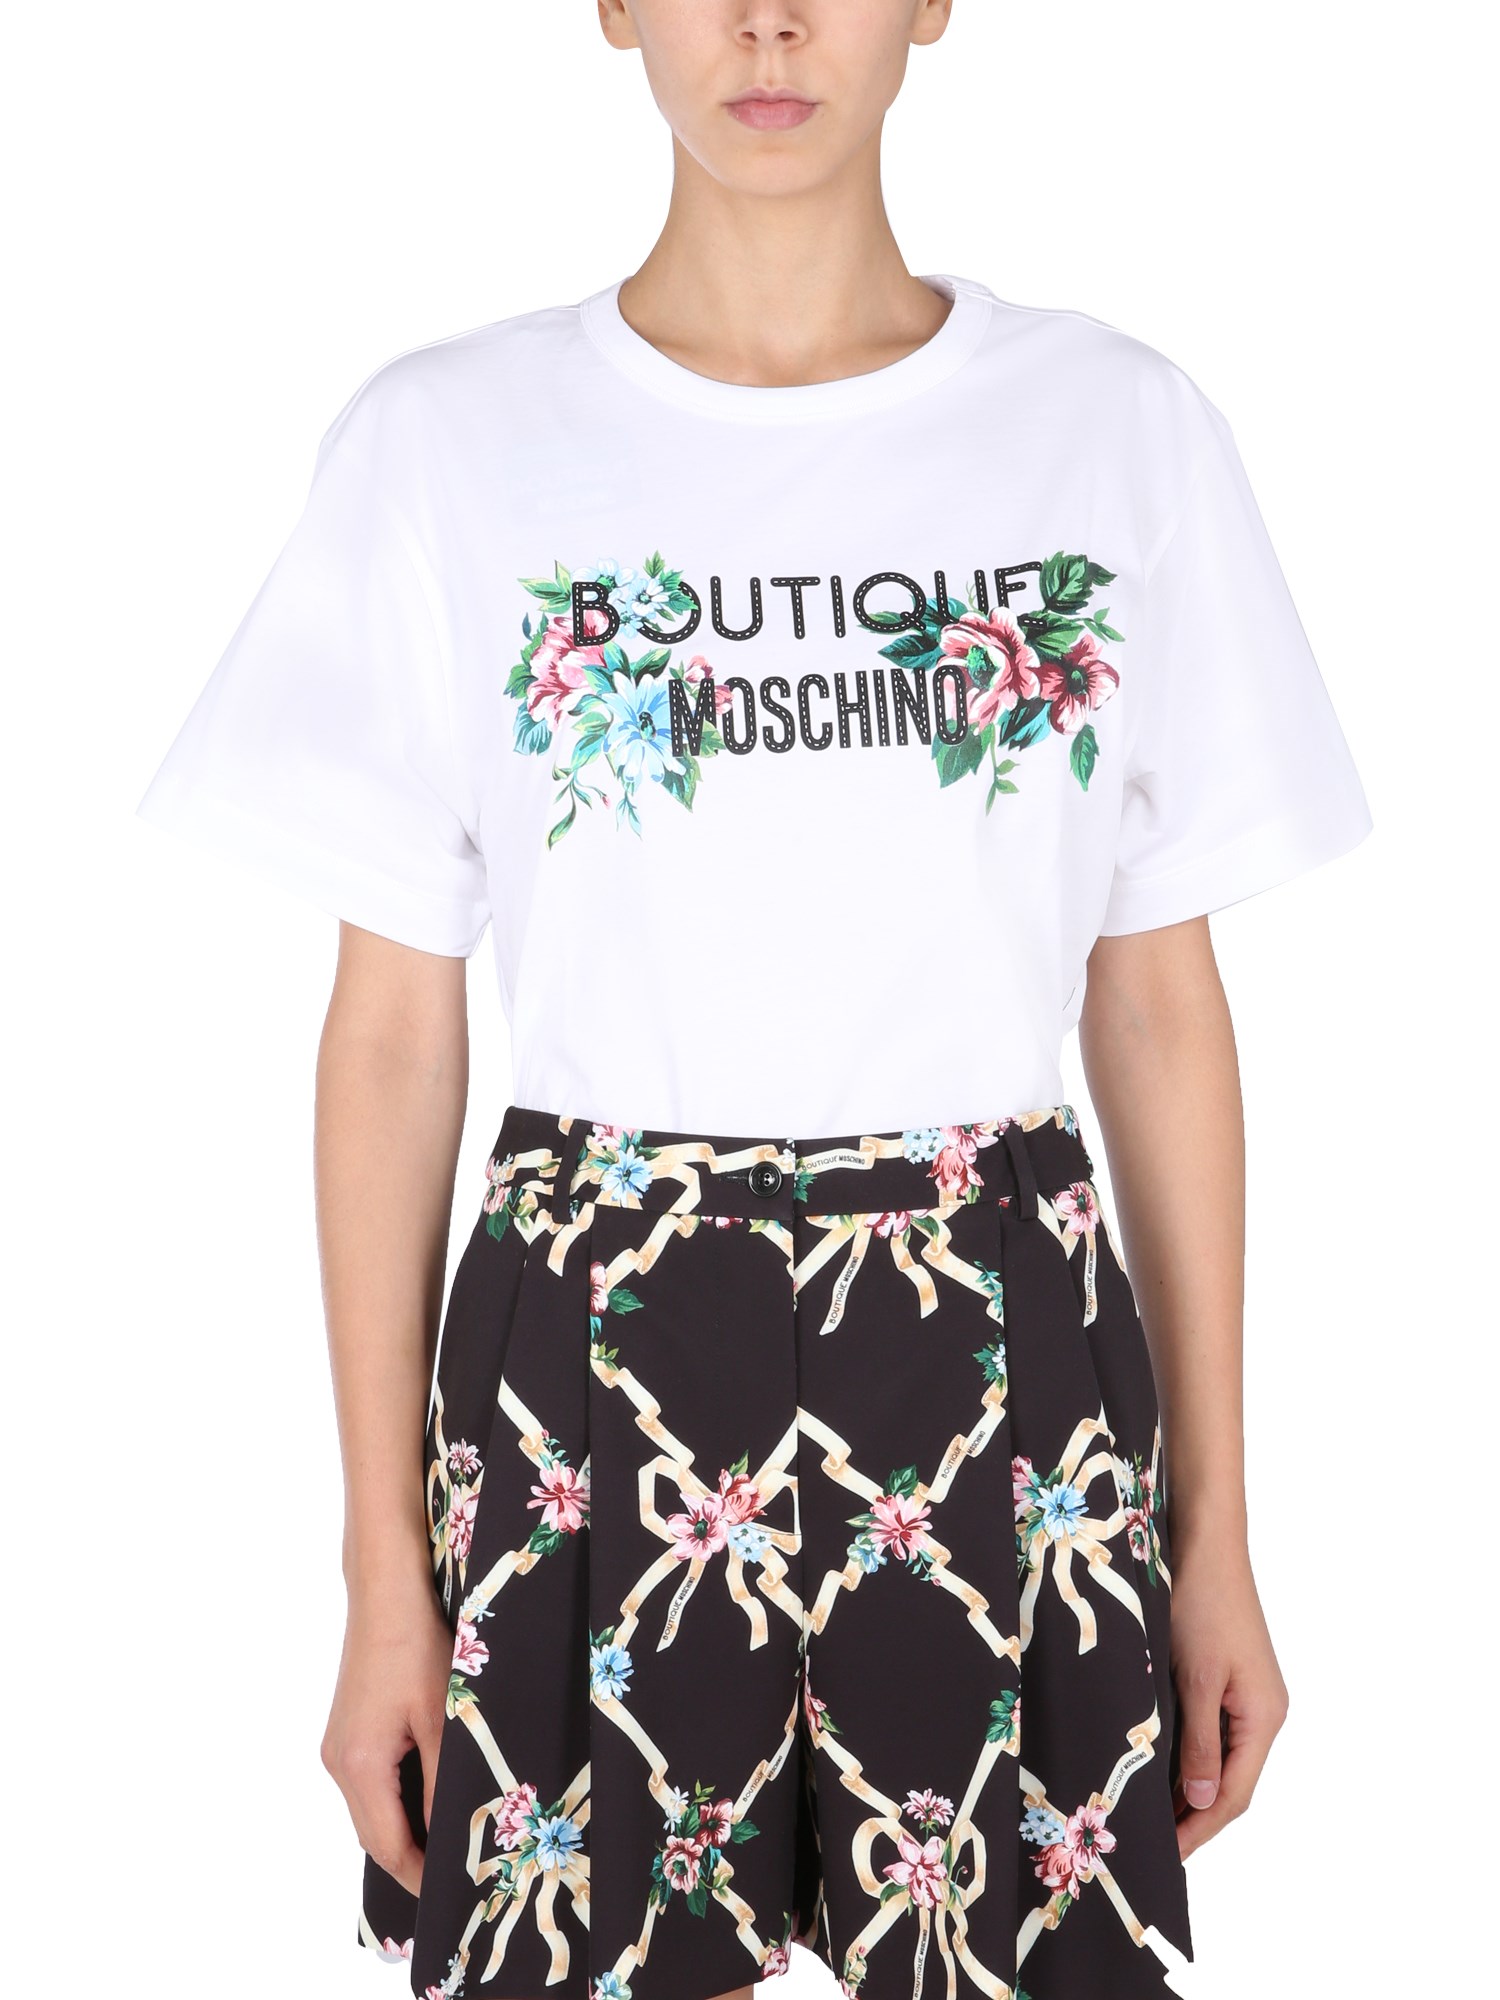 boutique moschino t-shirt with floral argyle print